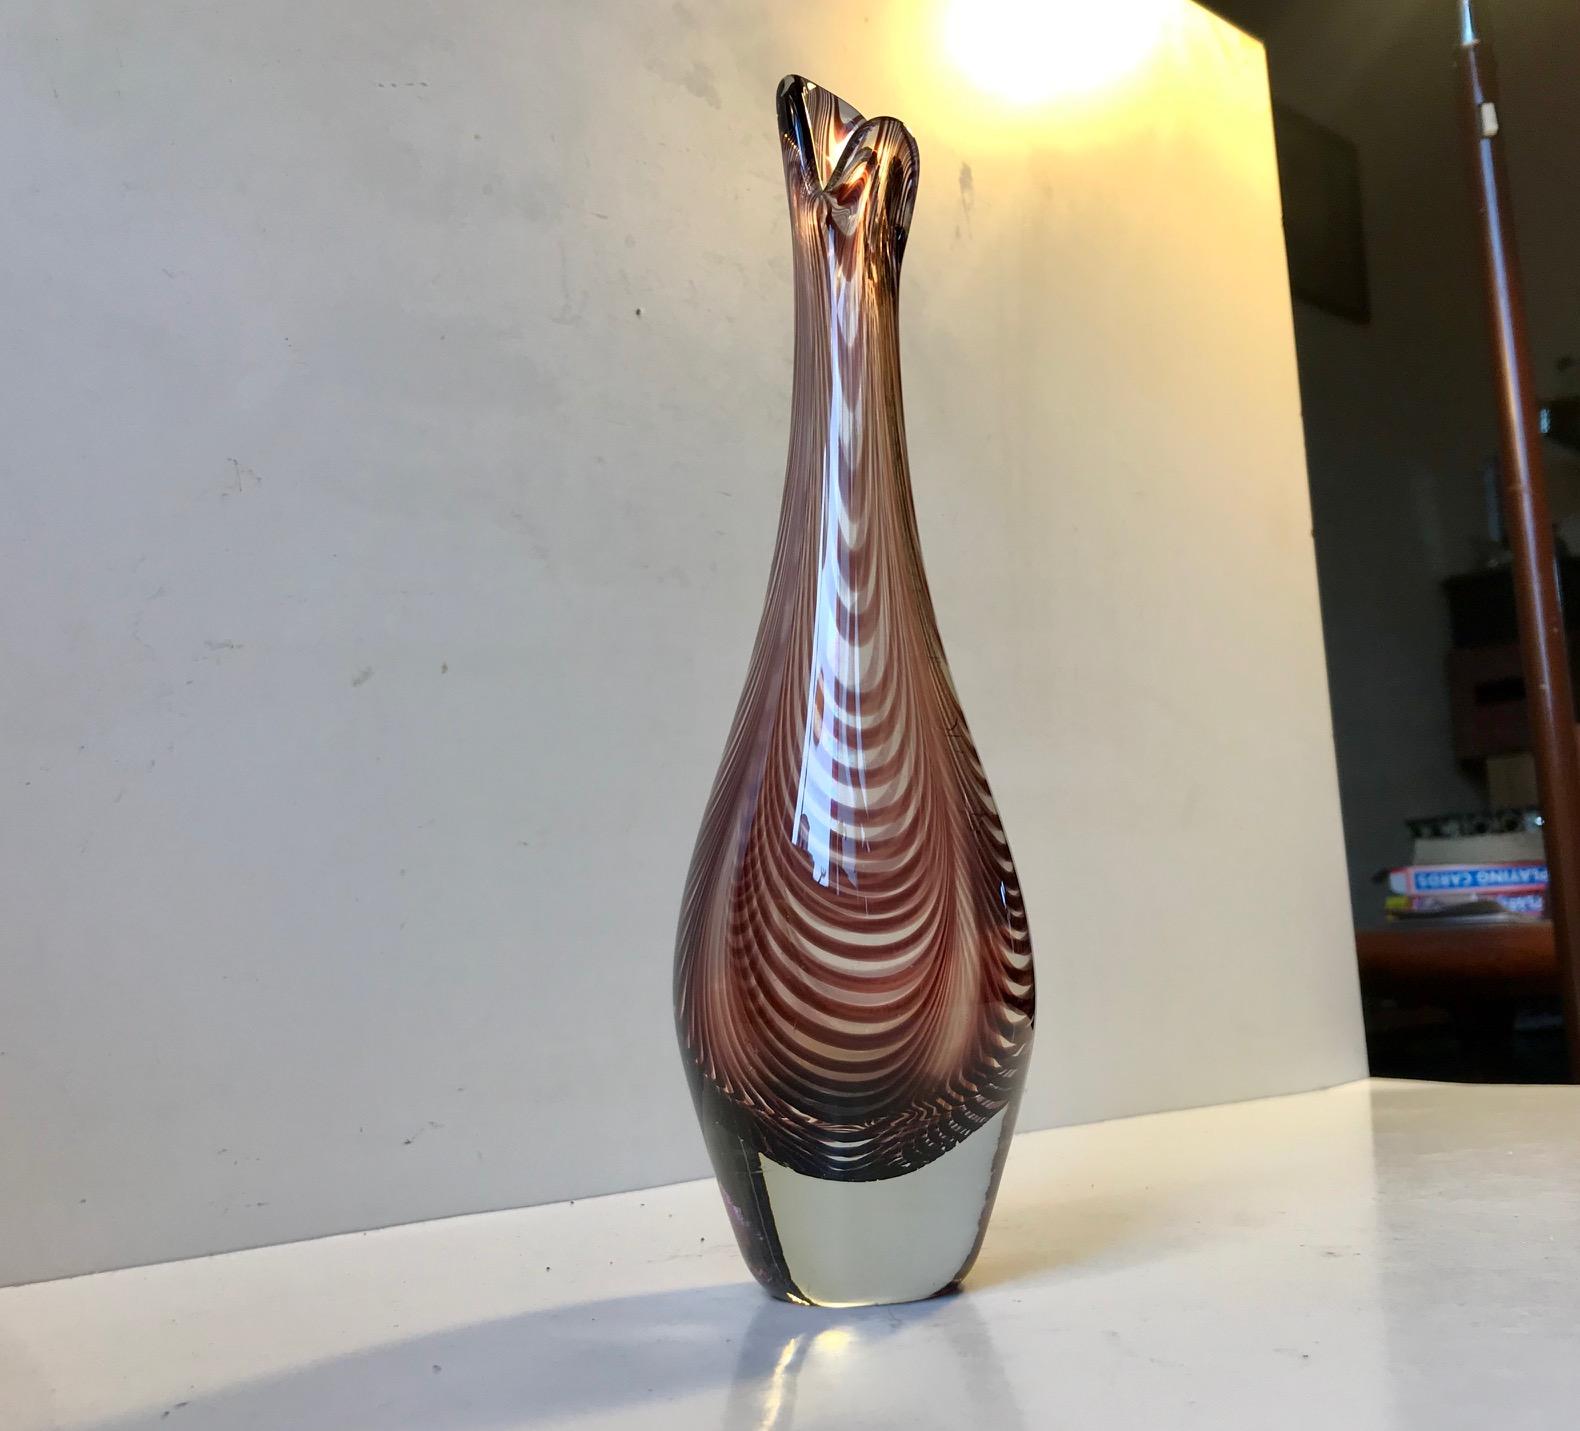 This organically hand blown vase screams Murano or Kai Franck but it is in fact Danish. The design is for obvious reasons called the duckling vase and resembles the Beak of a duck. It’s made from driven or swirl glass. This design by Lütken dates to